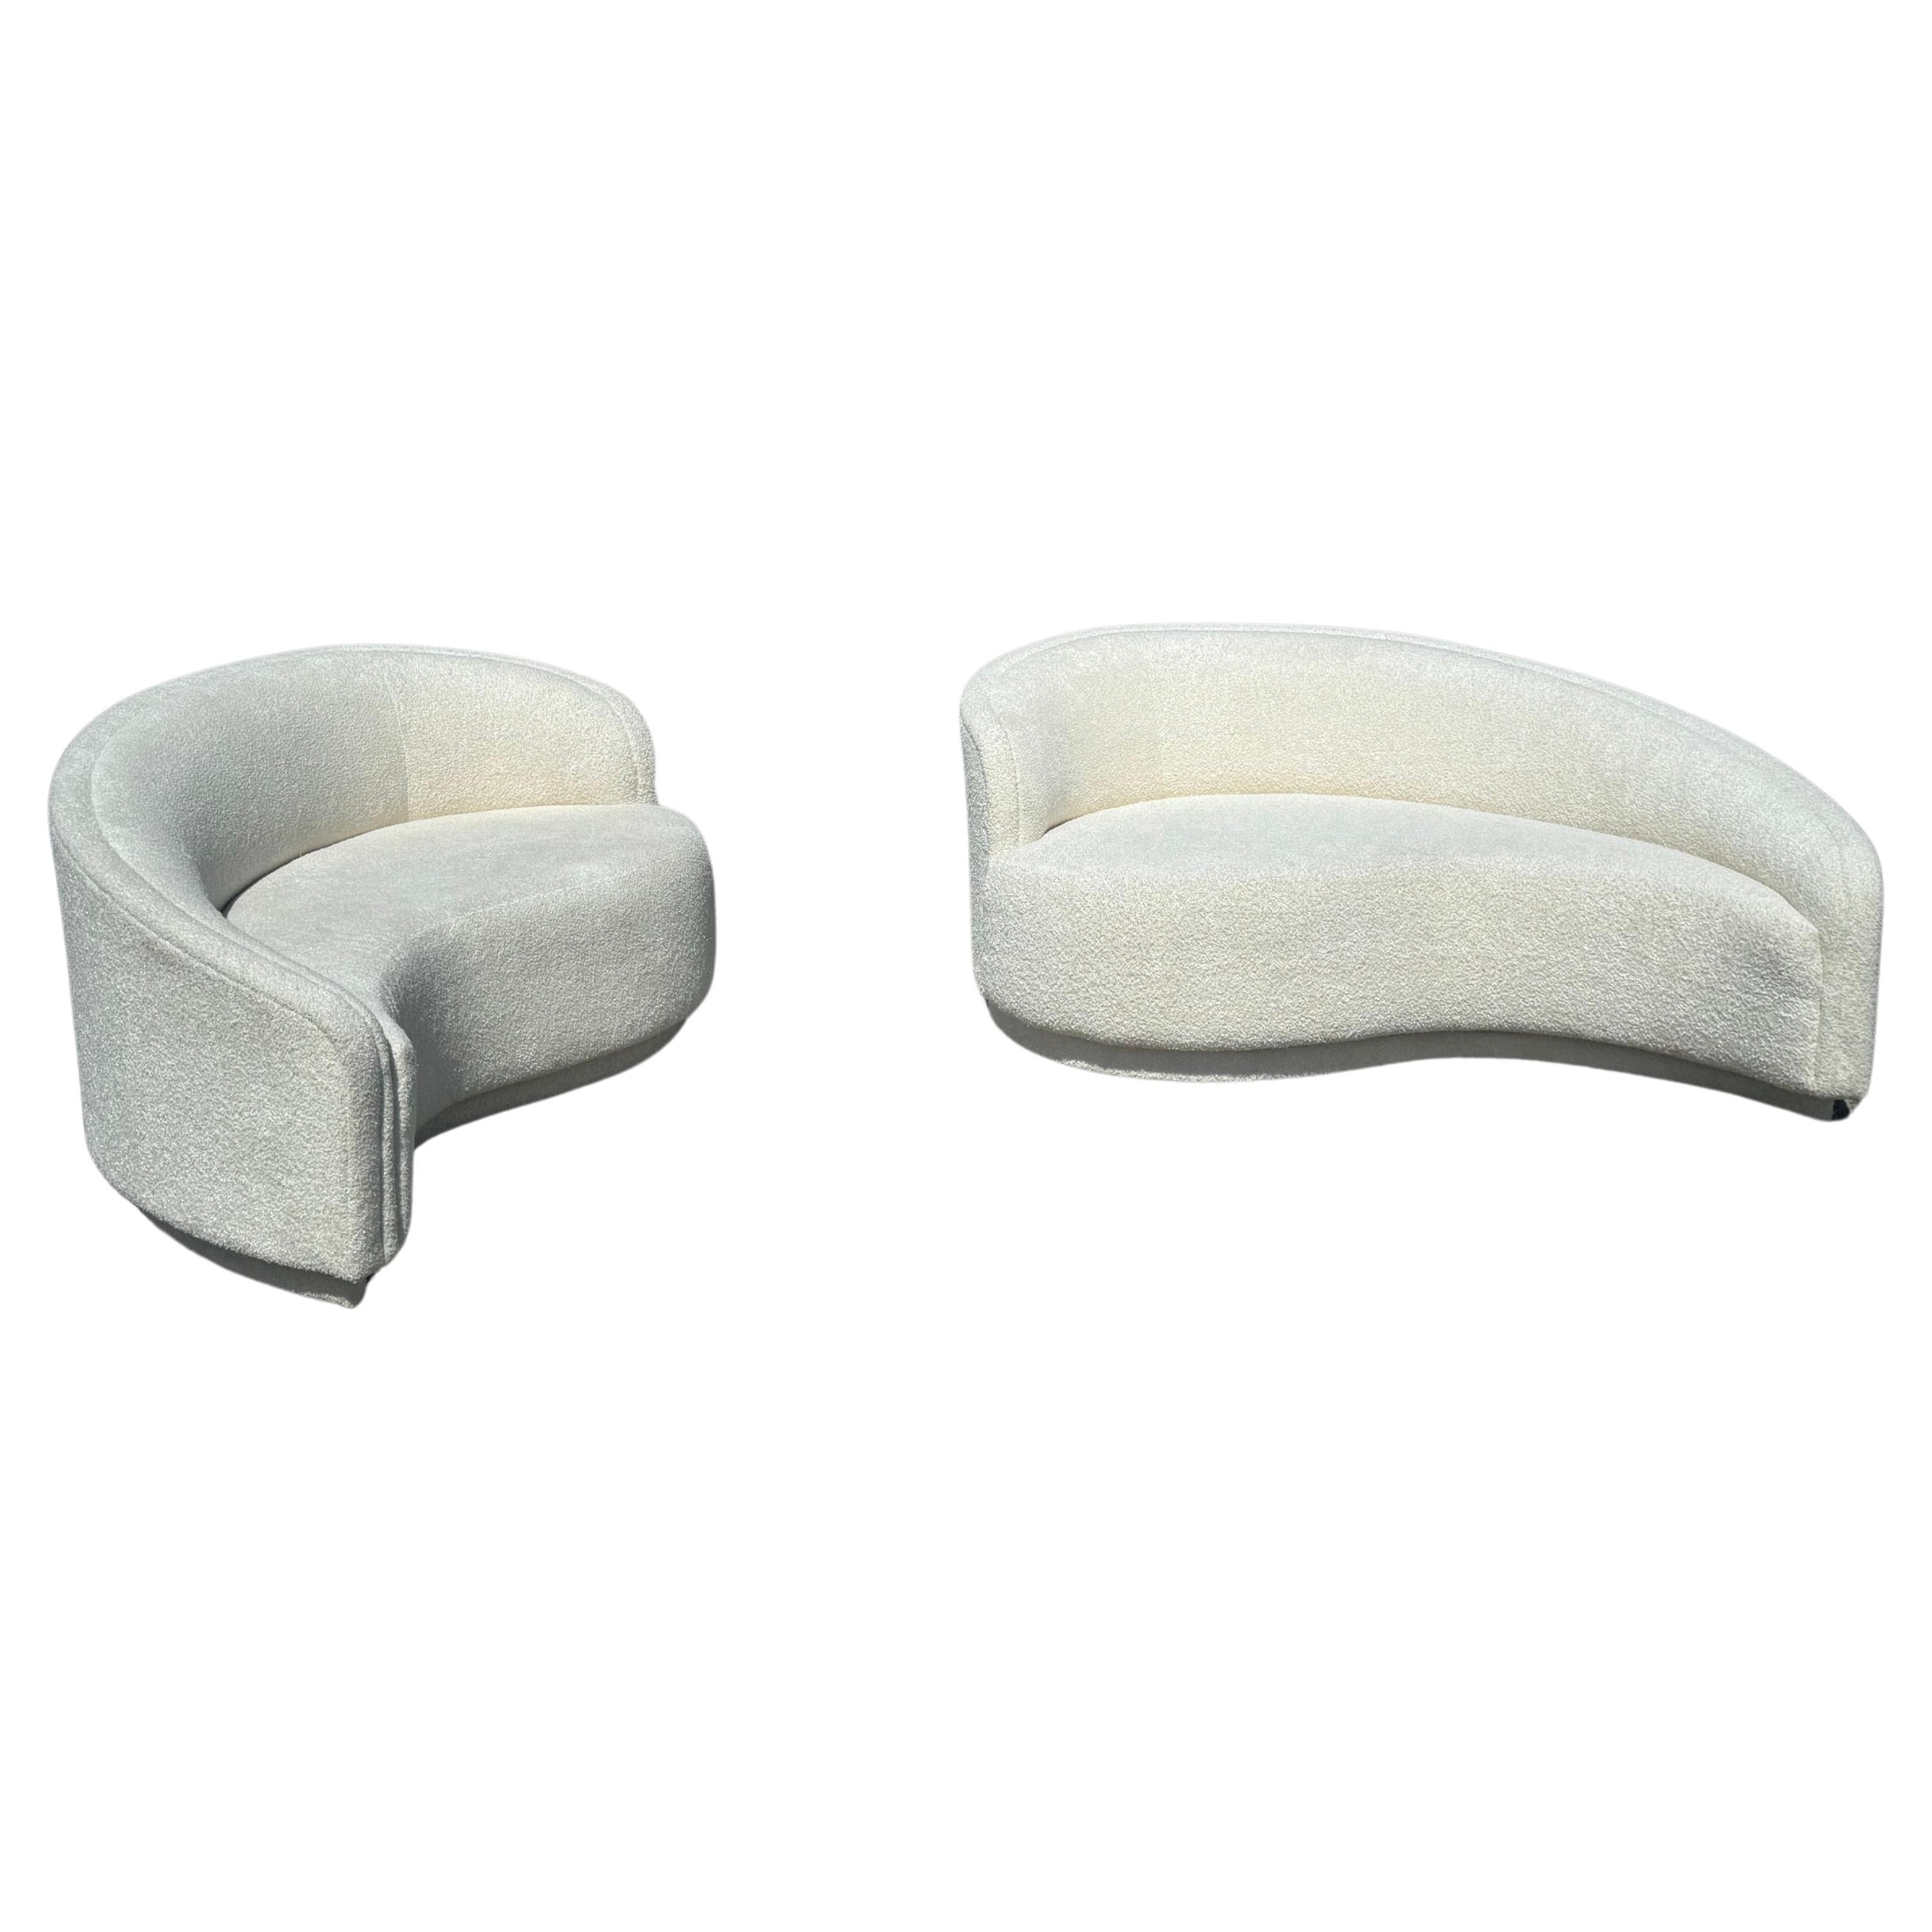 1980s Glamours Curved Sofa - Chaise by Vladimir Kagan for Weiman in White Bouclé For Sale